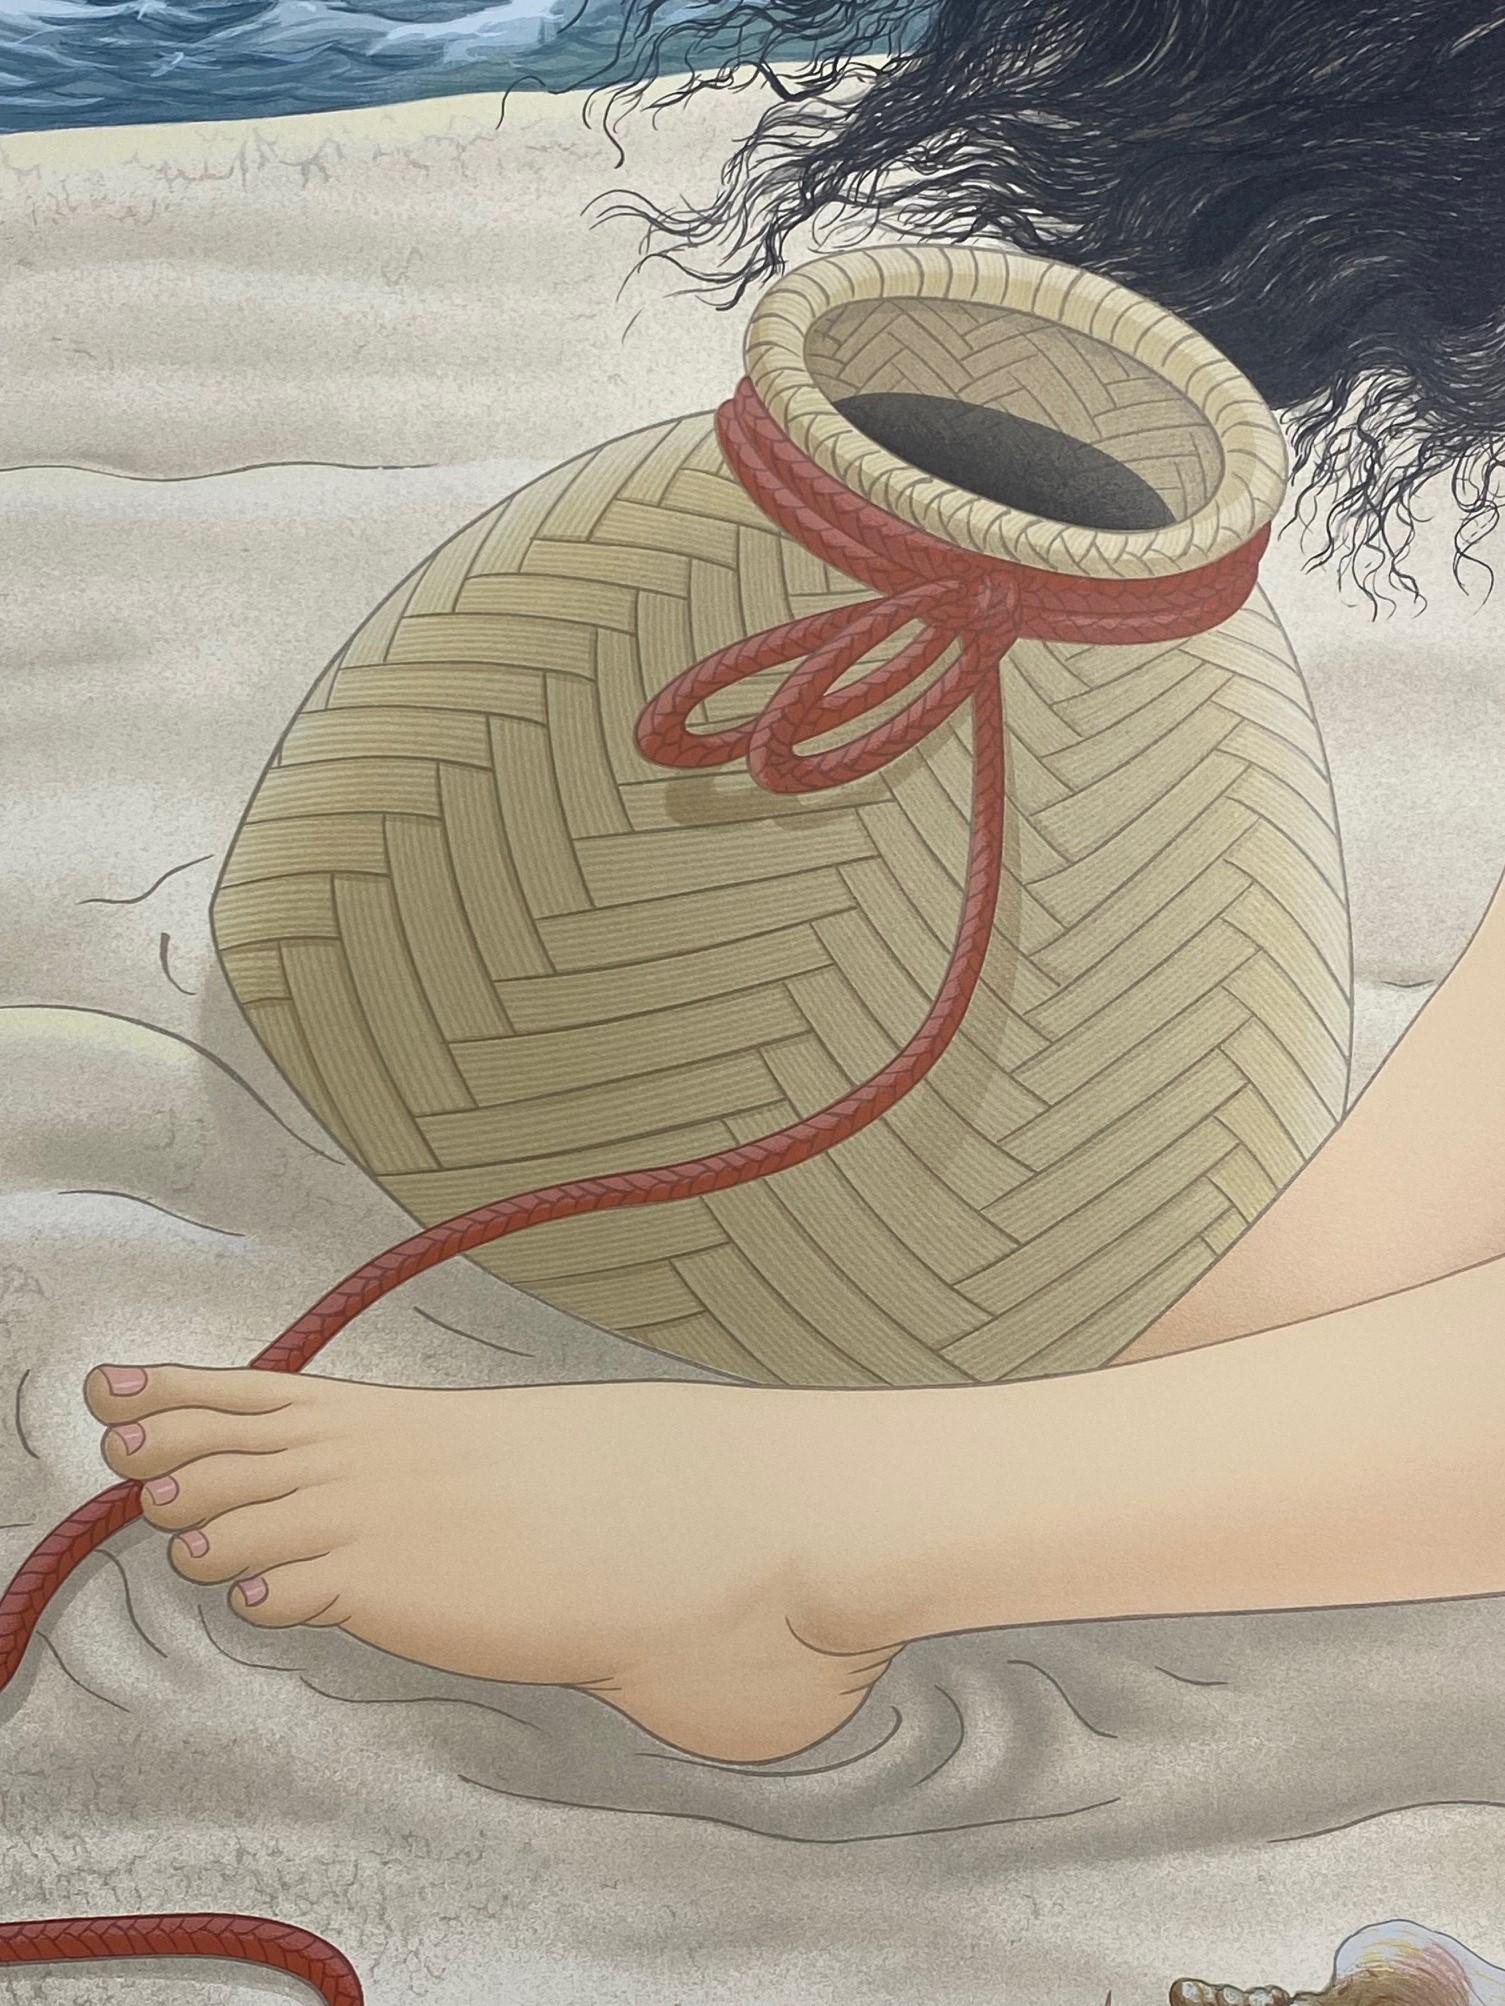 Paper Muramasa Kudo Signed Limited Edition Japanese Serigraph Print Wicker Basket For Sale